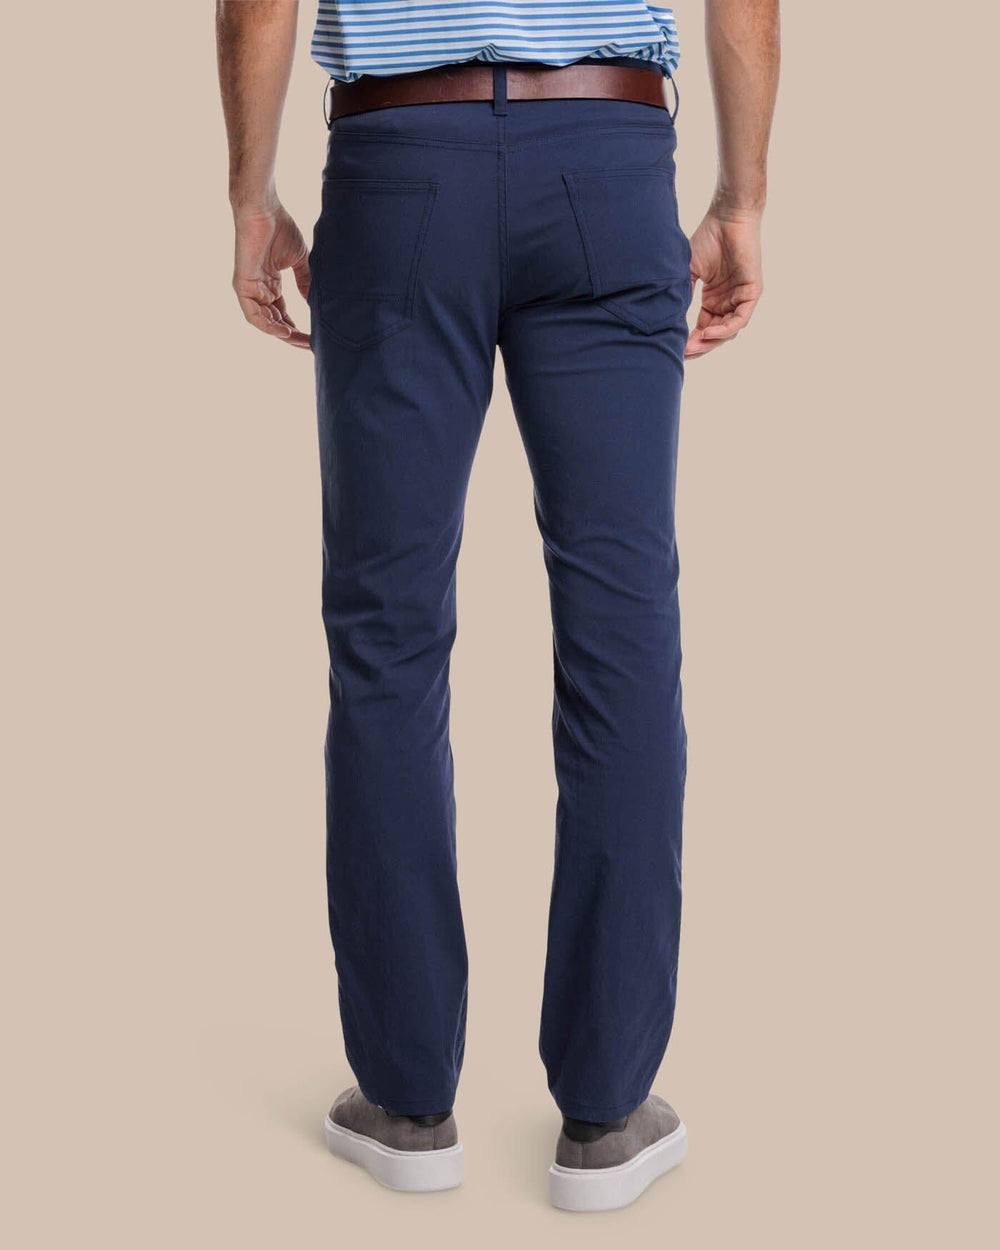 The back view of the Southern Tide Intercoastal Performance Pant by Southern Tide - True Navy